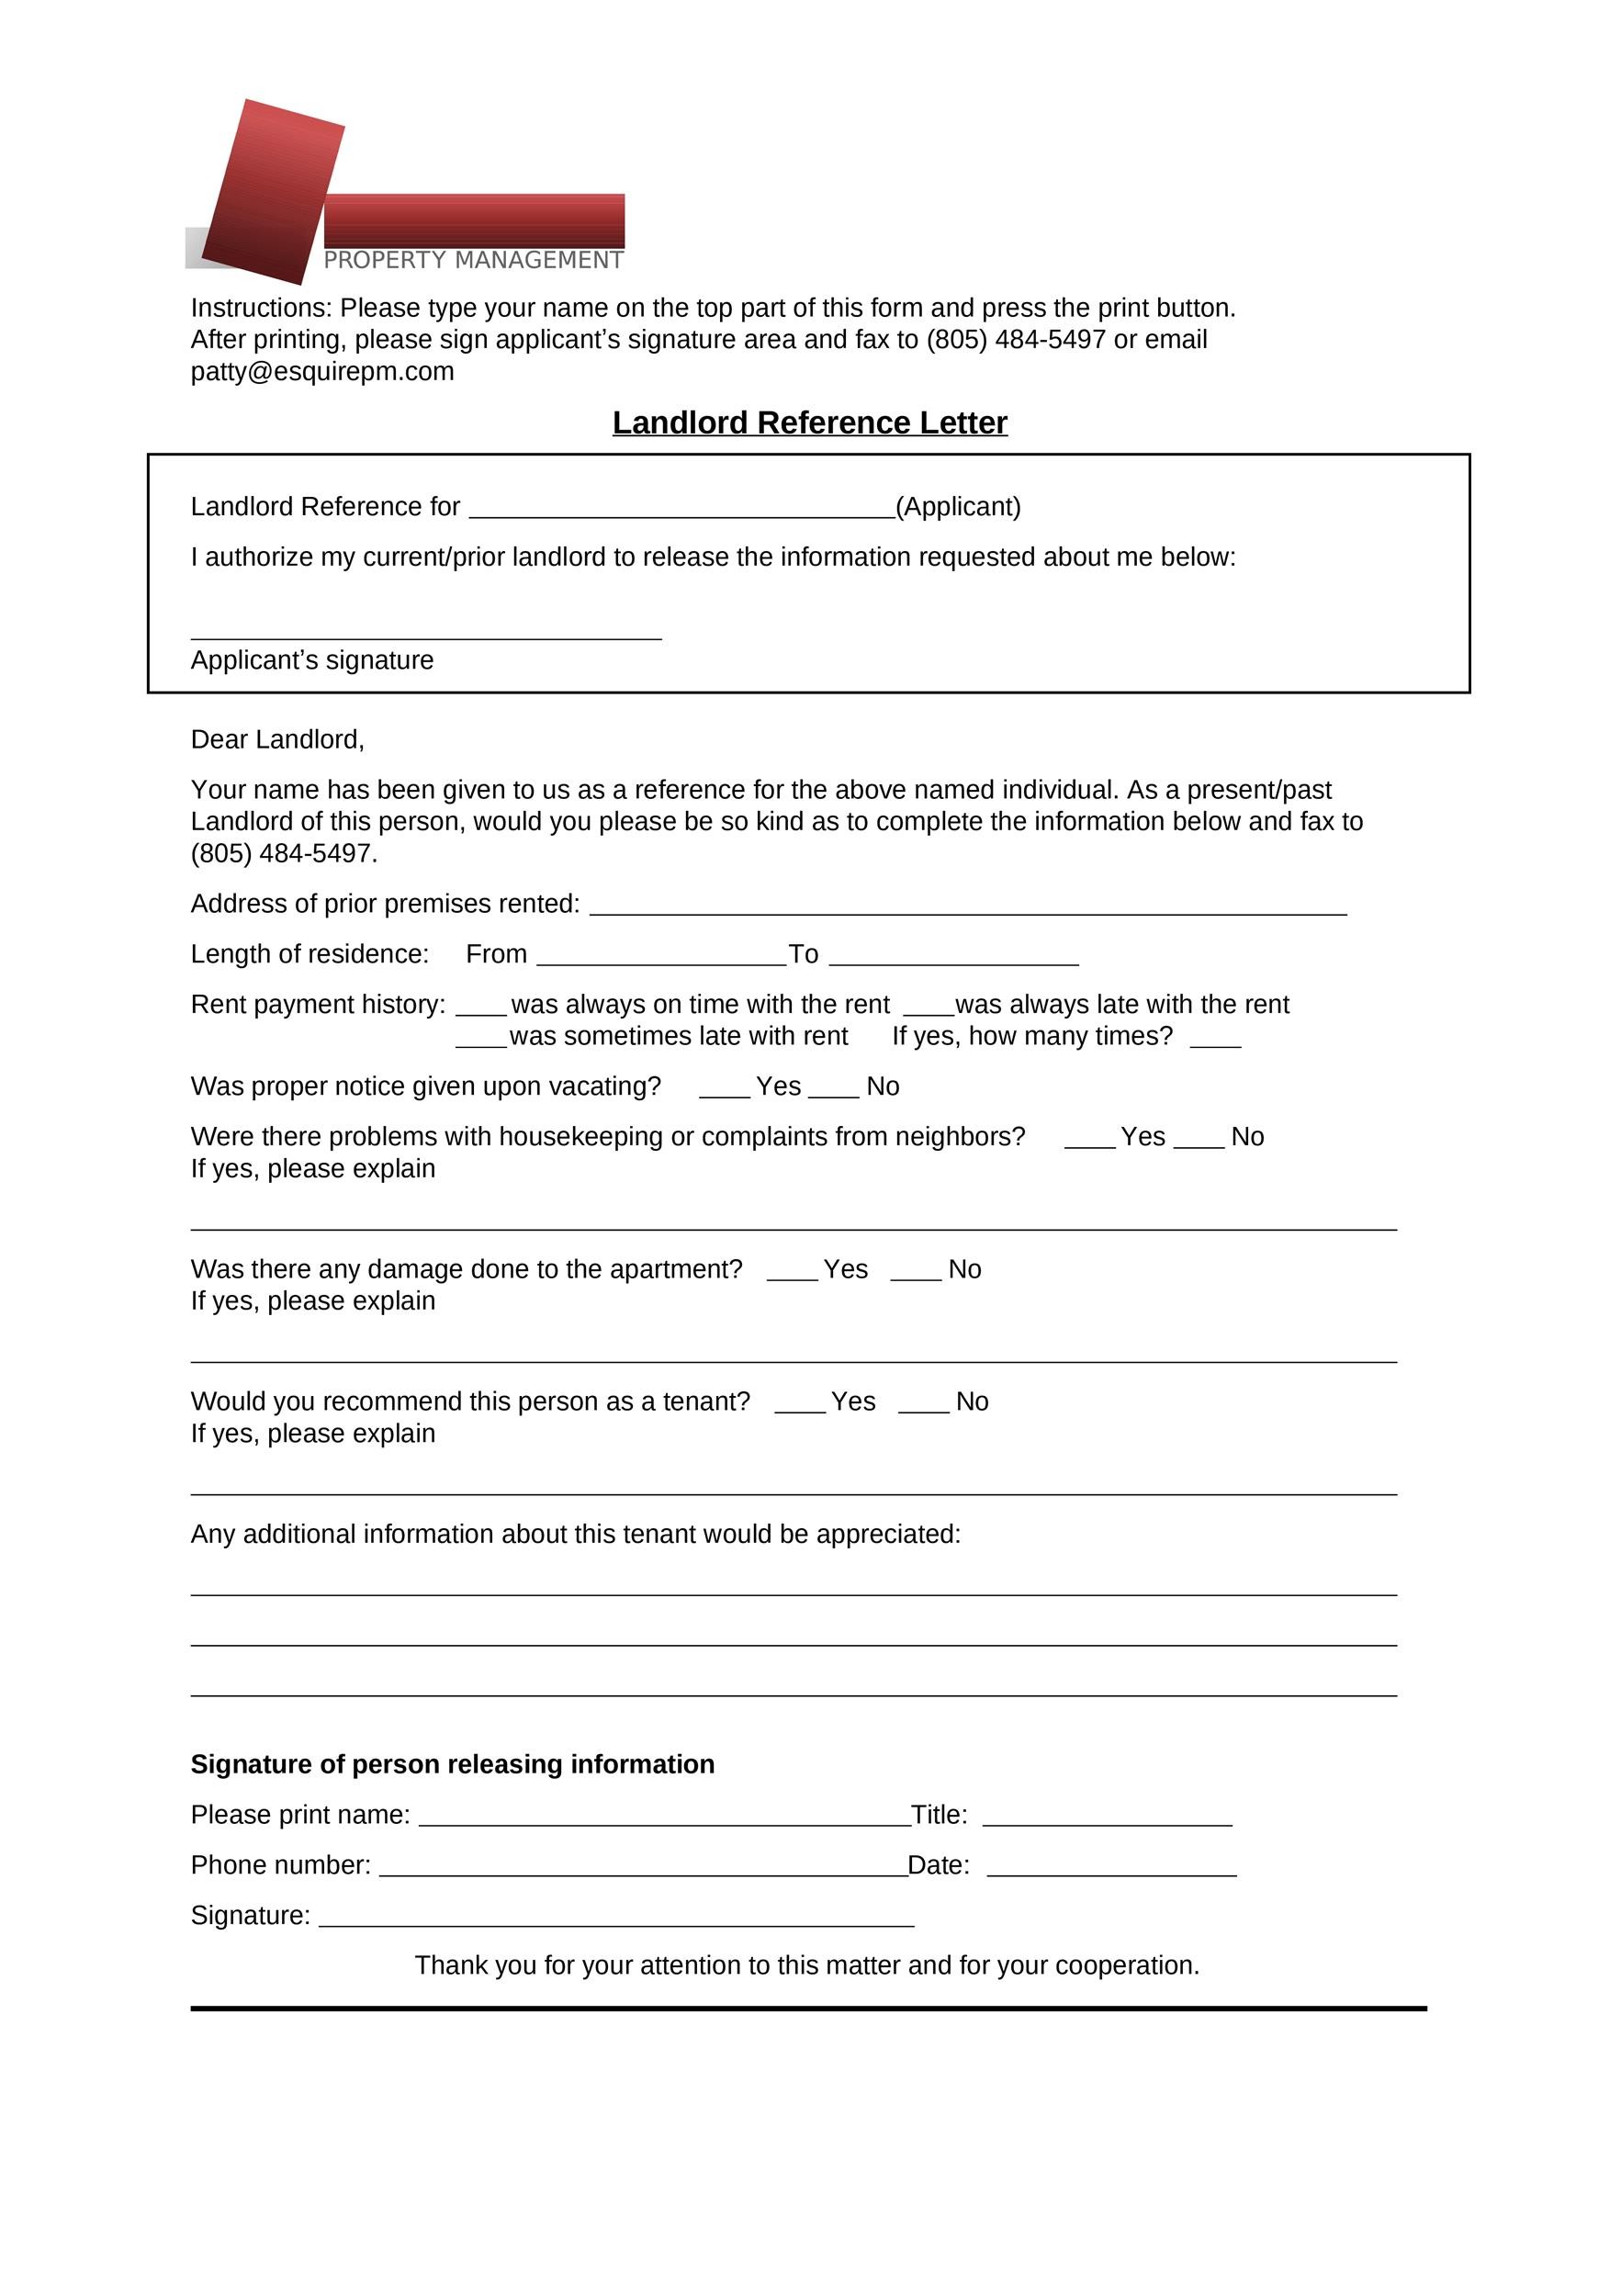 Free landlord reference letter 31